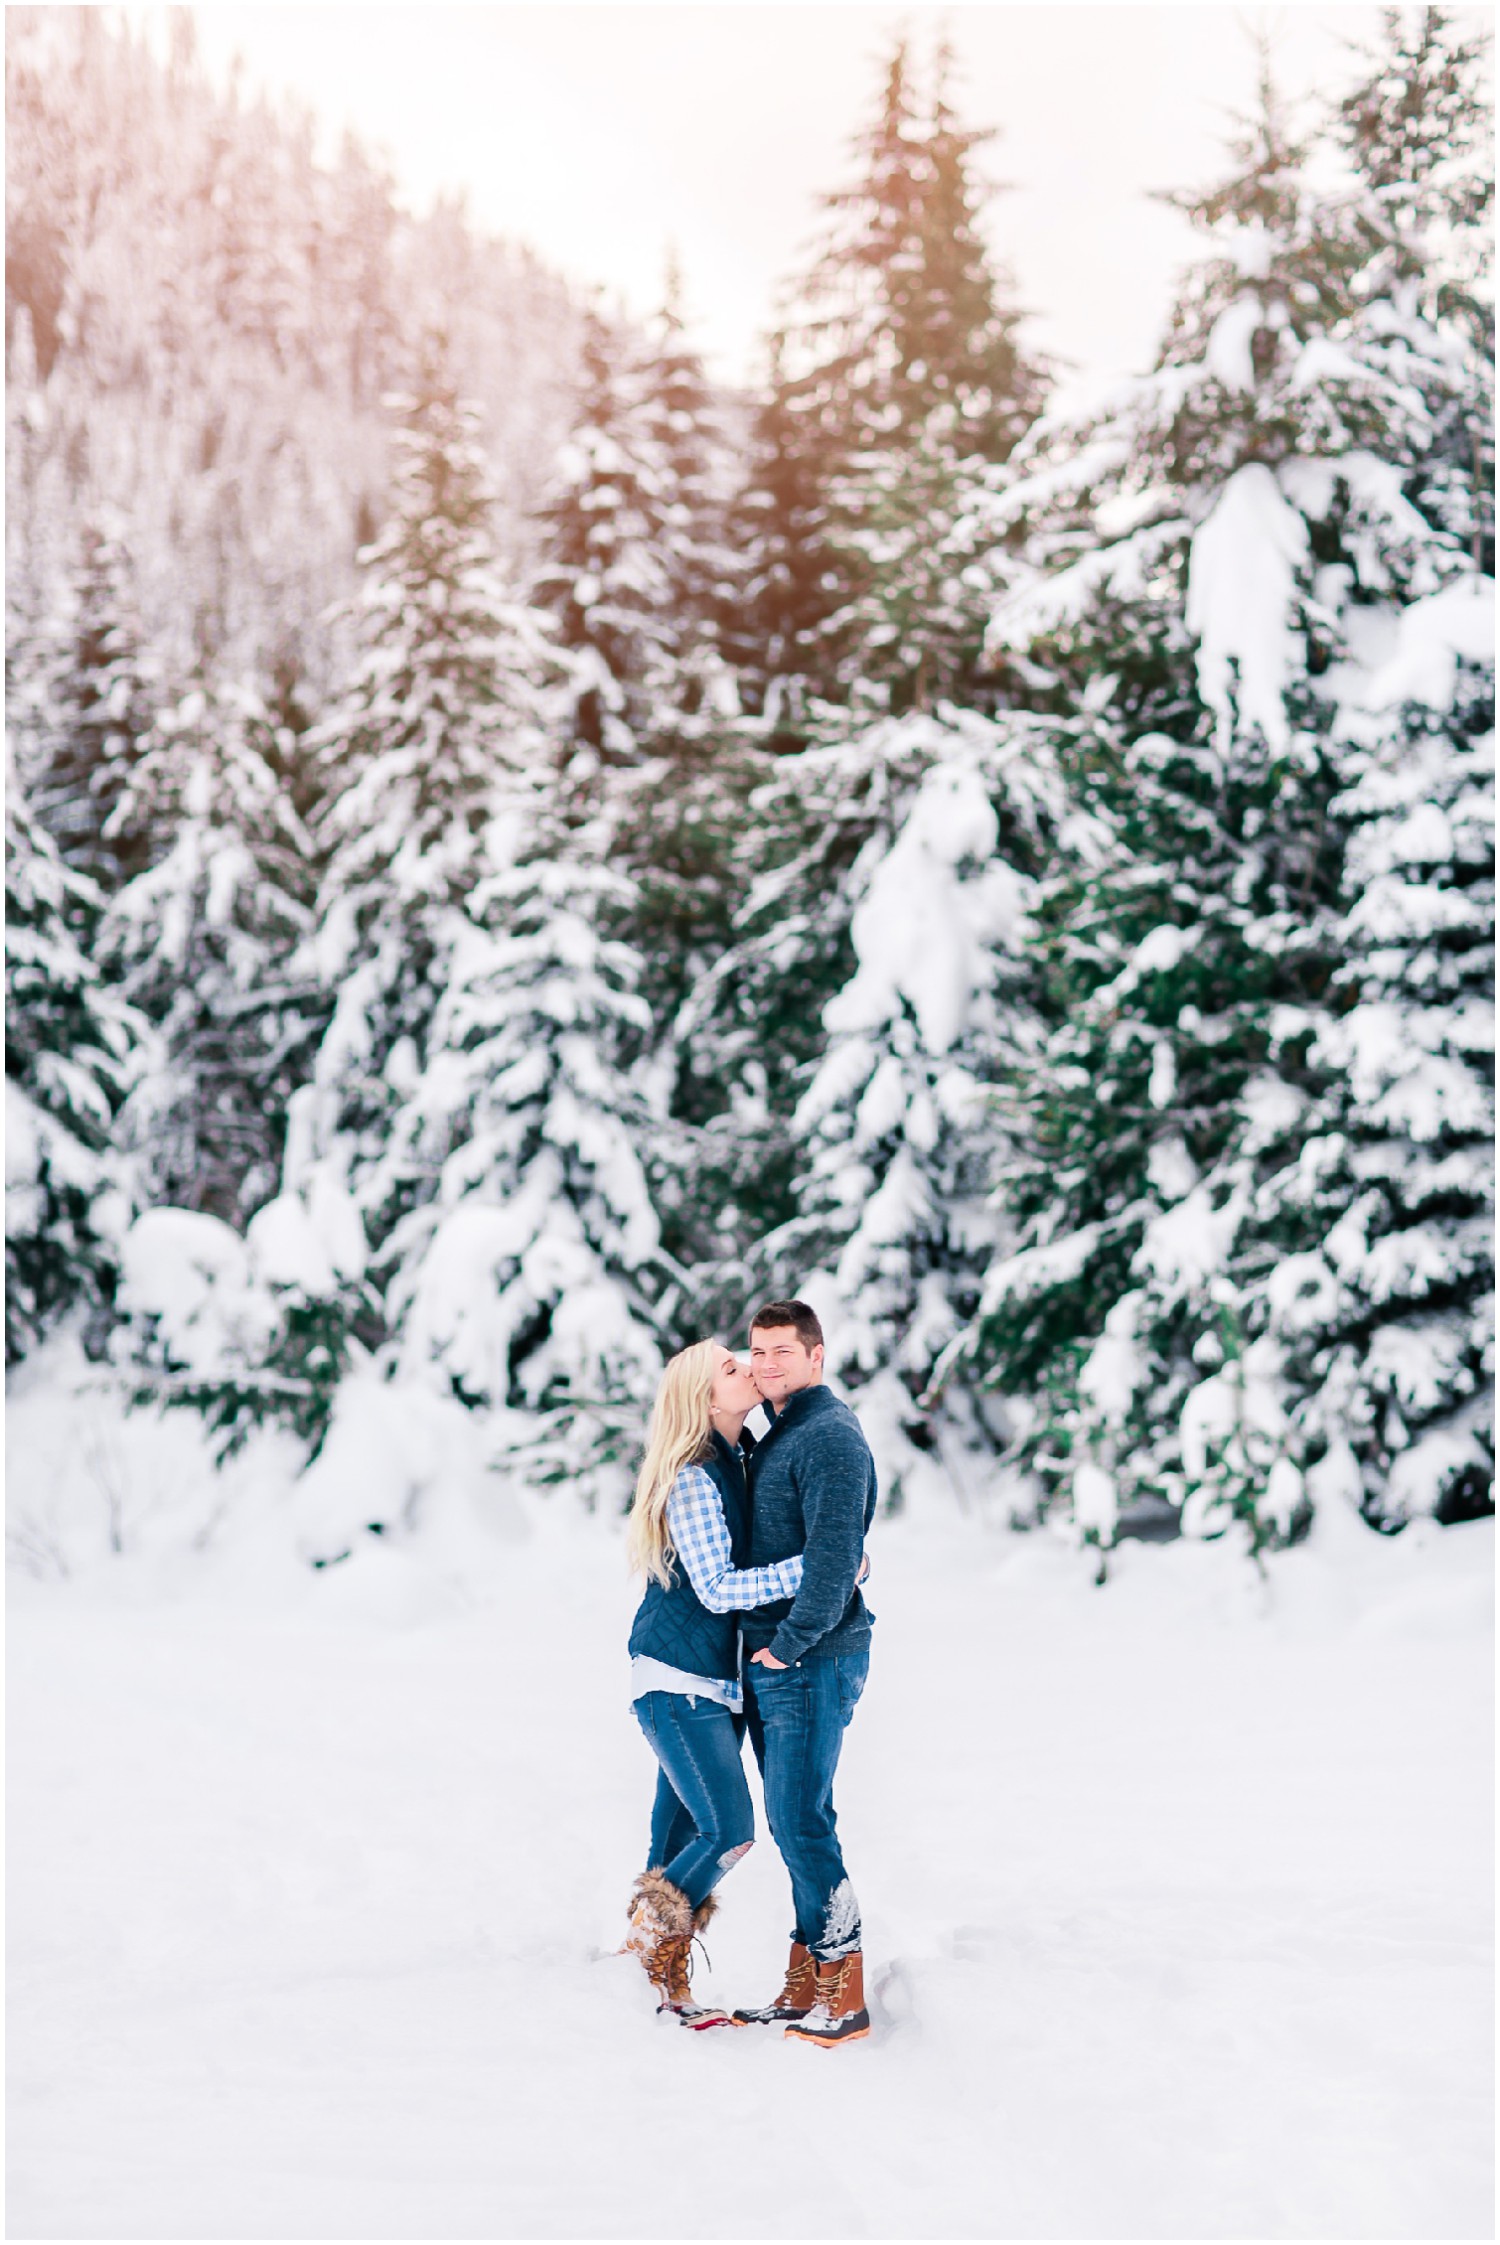 A Magical Winter Engagement Session at Gold Creek Pond